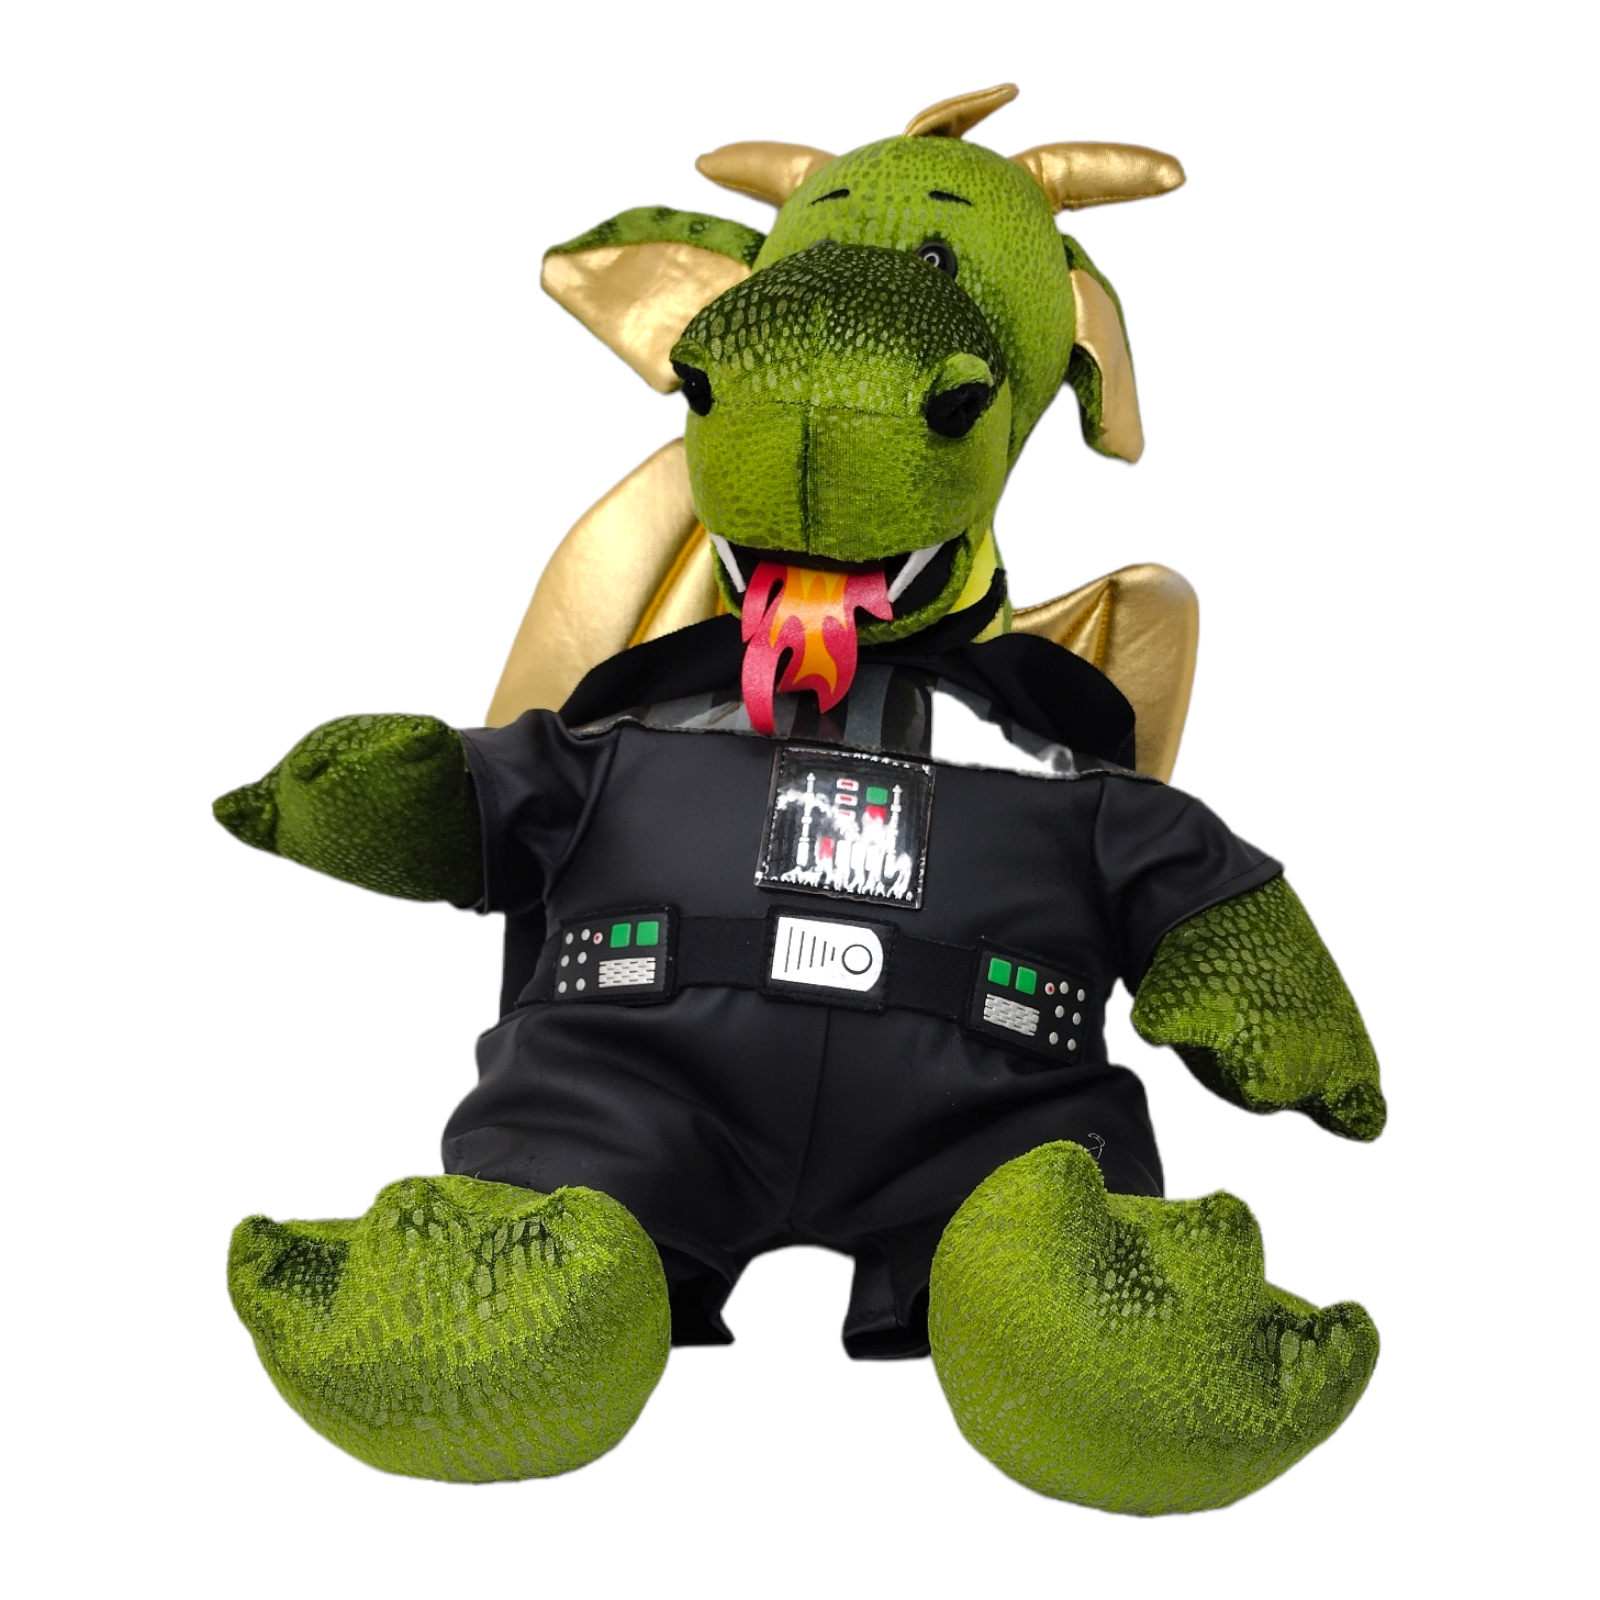 Primary image for Build A Bear Green Fire Breathing Dragon Plush 18" w/ Darth Vader Outfit